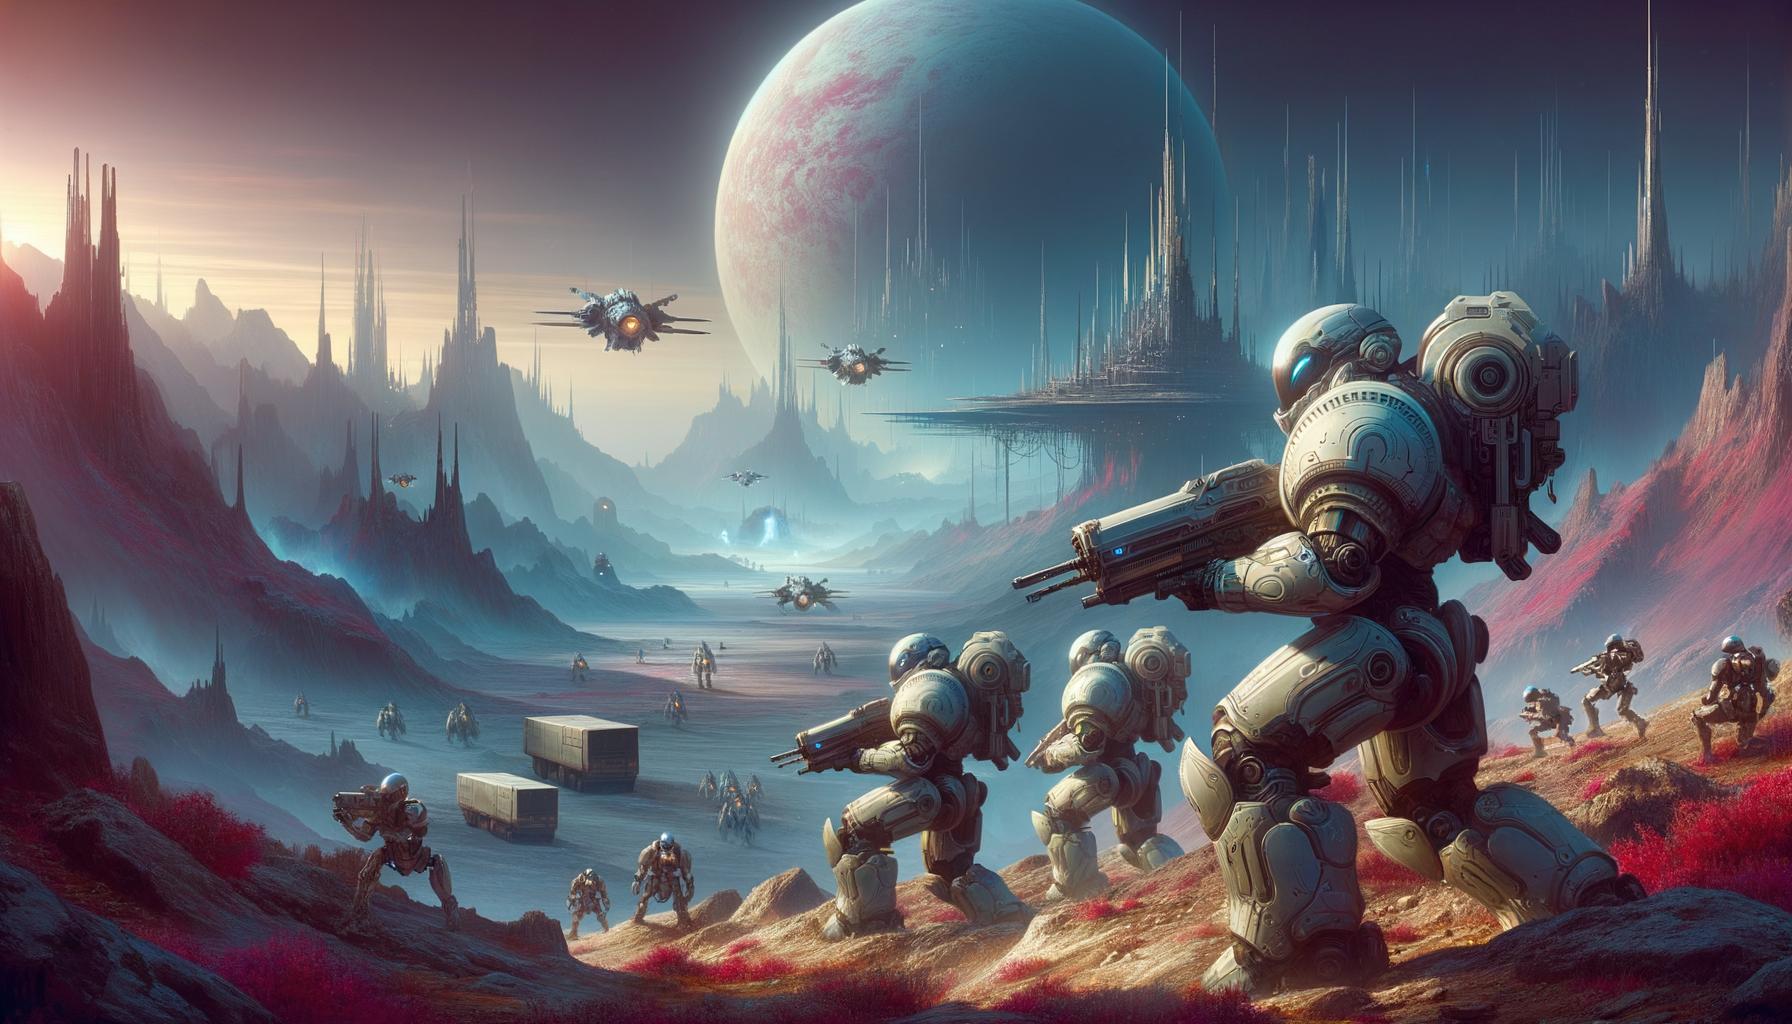 Journey through the Depths: A Traveler’s Guide to Destiny’s Worlds